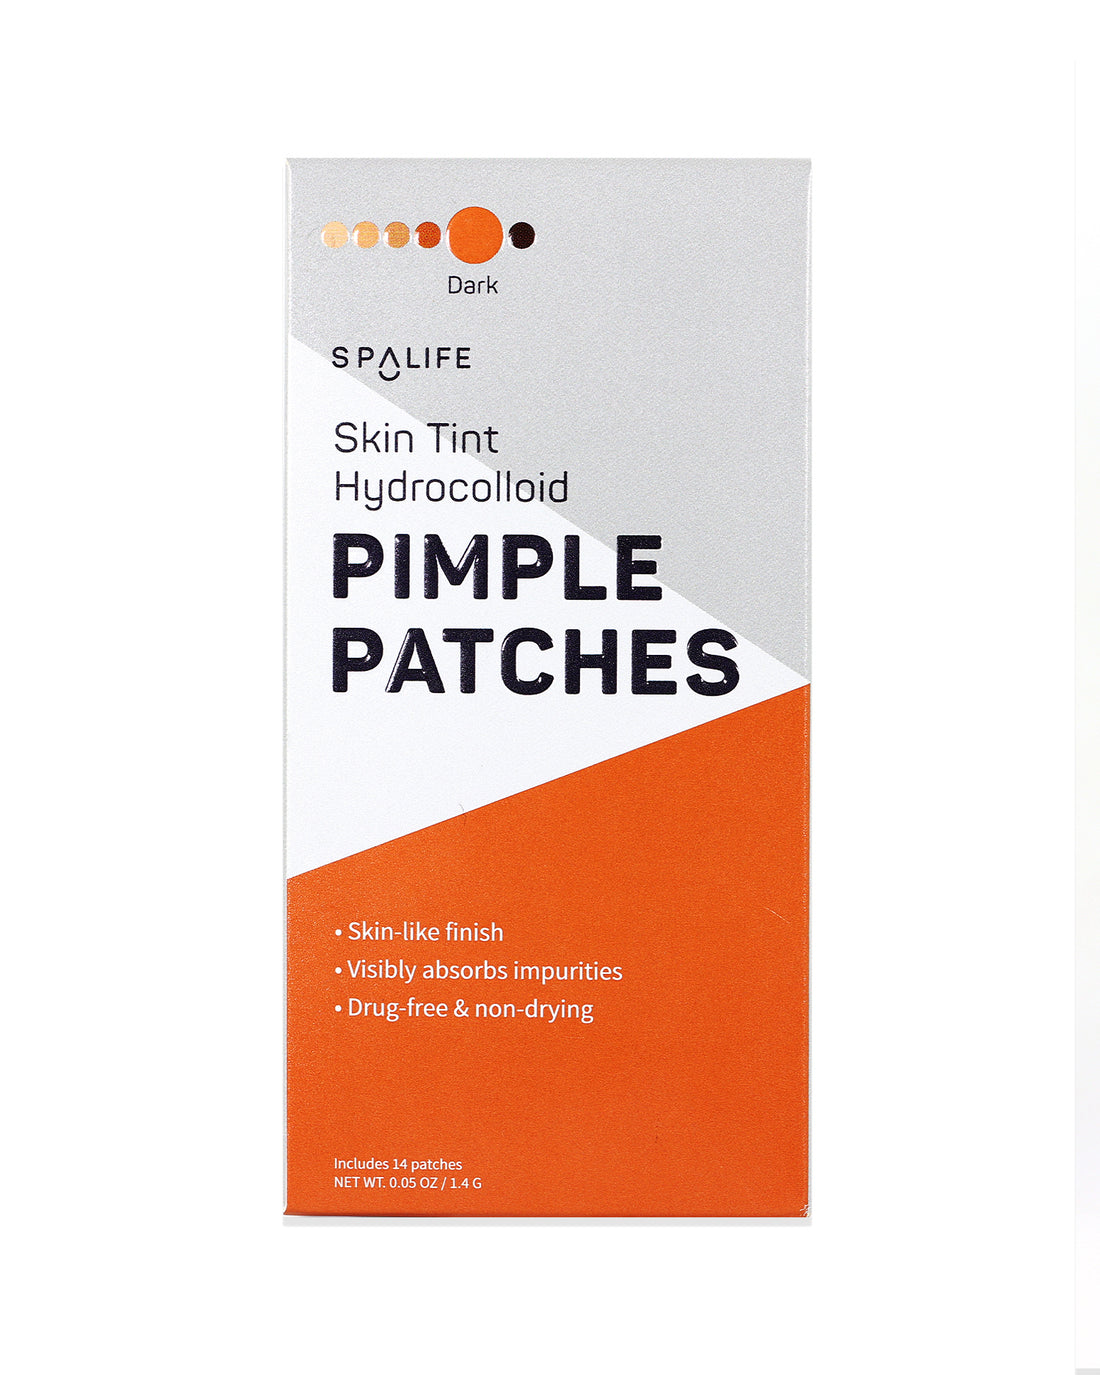 Skin_tint_pimple_patches_packe-707